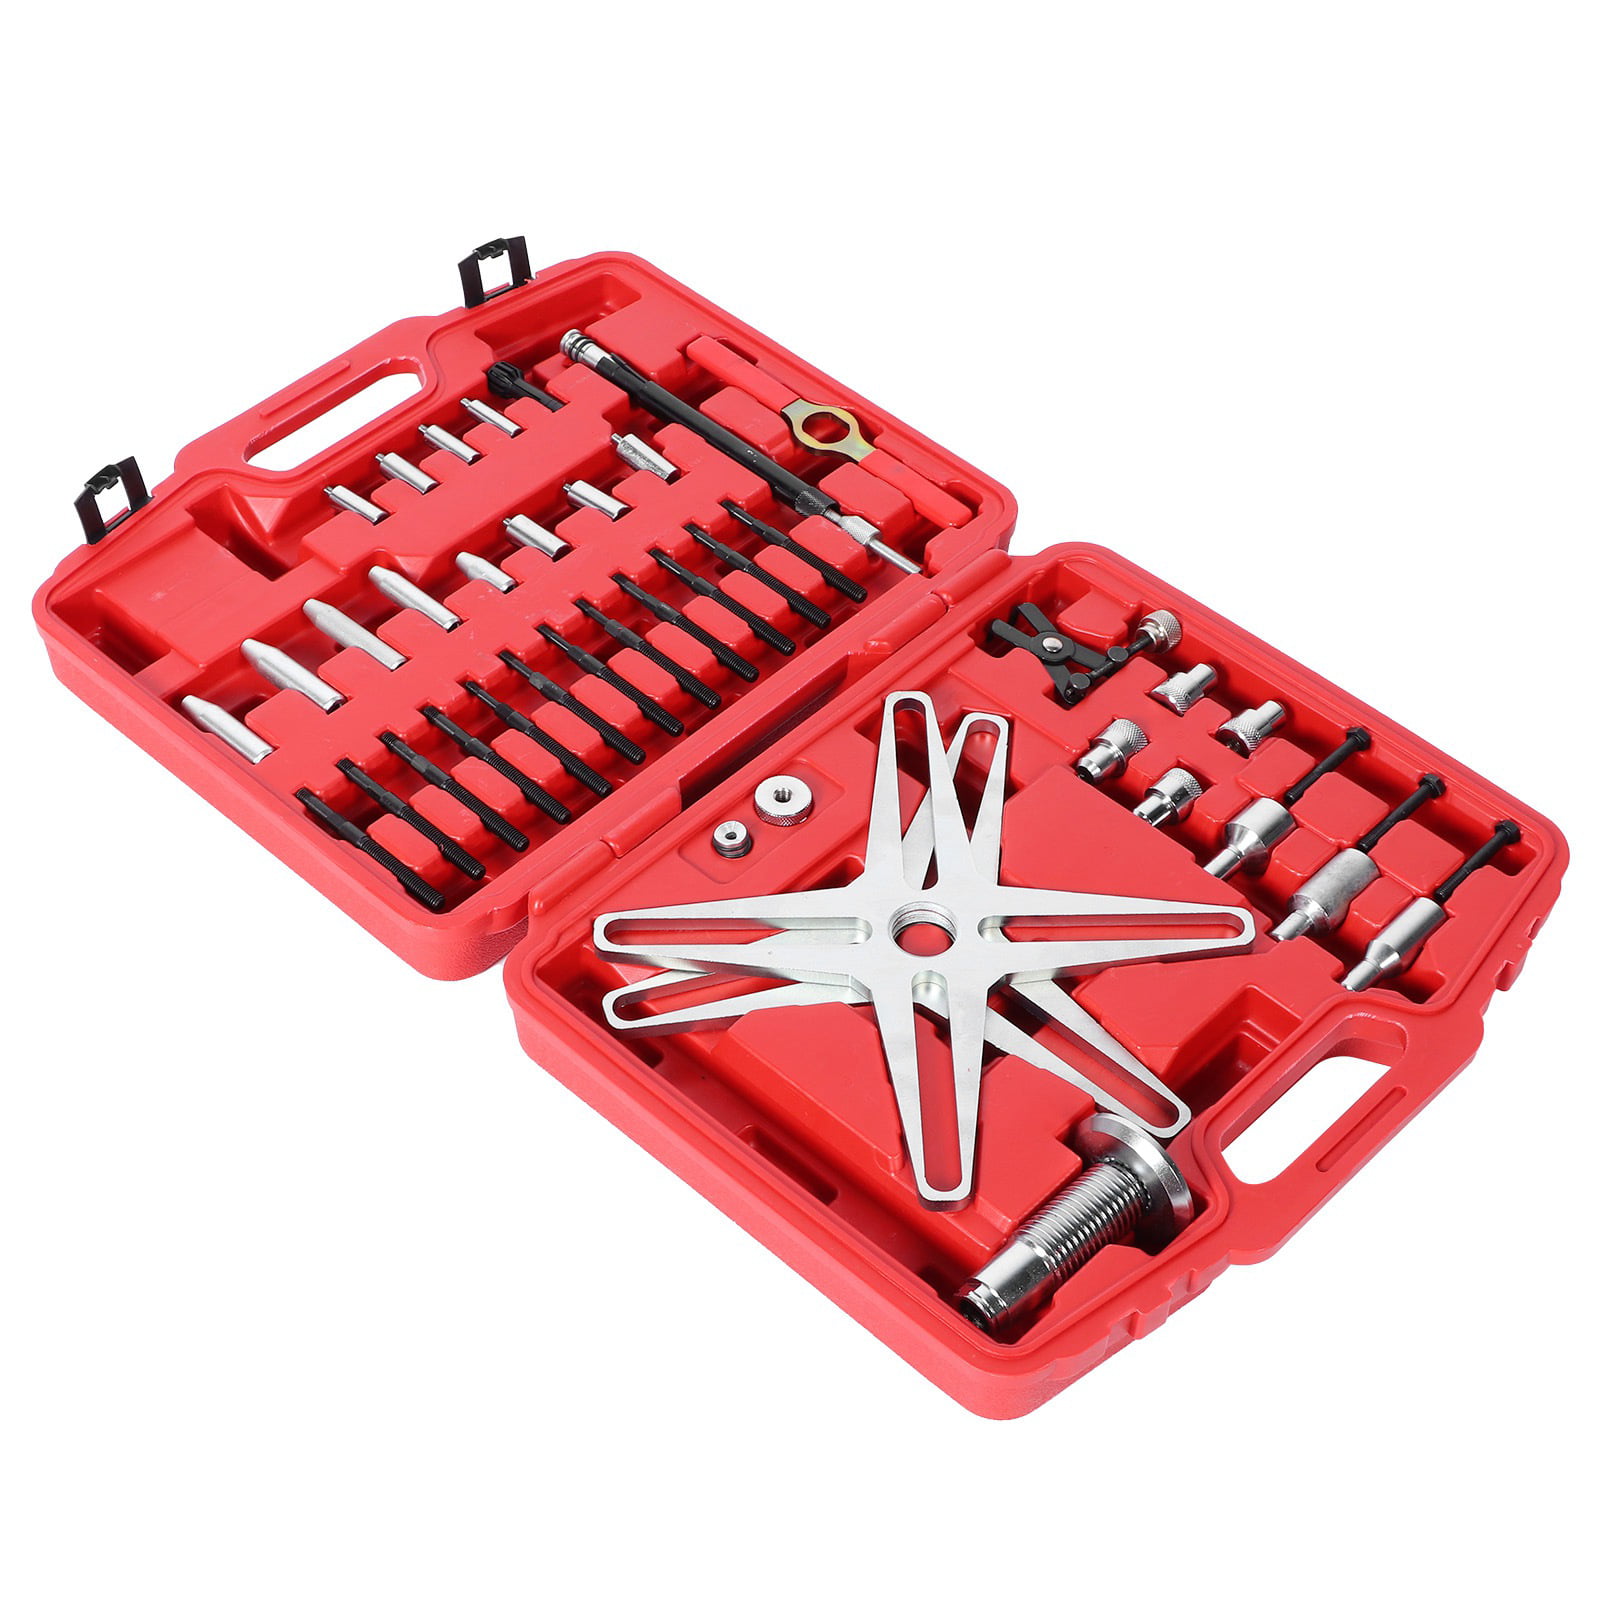 Storage Box 43Pcs Self-Adjusting Clutch Alignment Setting Tool Universal S‑SAC34UPG Self Adjusting Clutch Tool Fit for Connectors with 3‑hole and 4‑hole pitch Steel Clutch Alignment Setting Tool